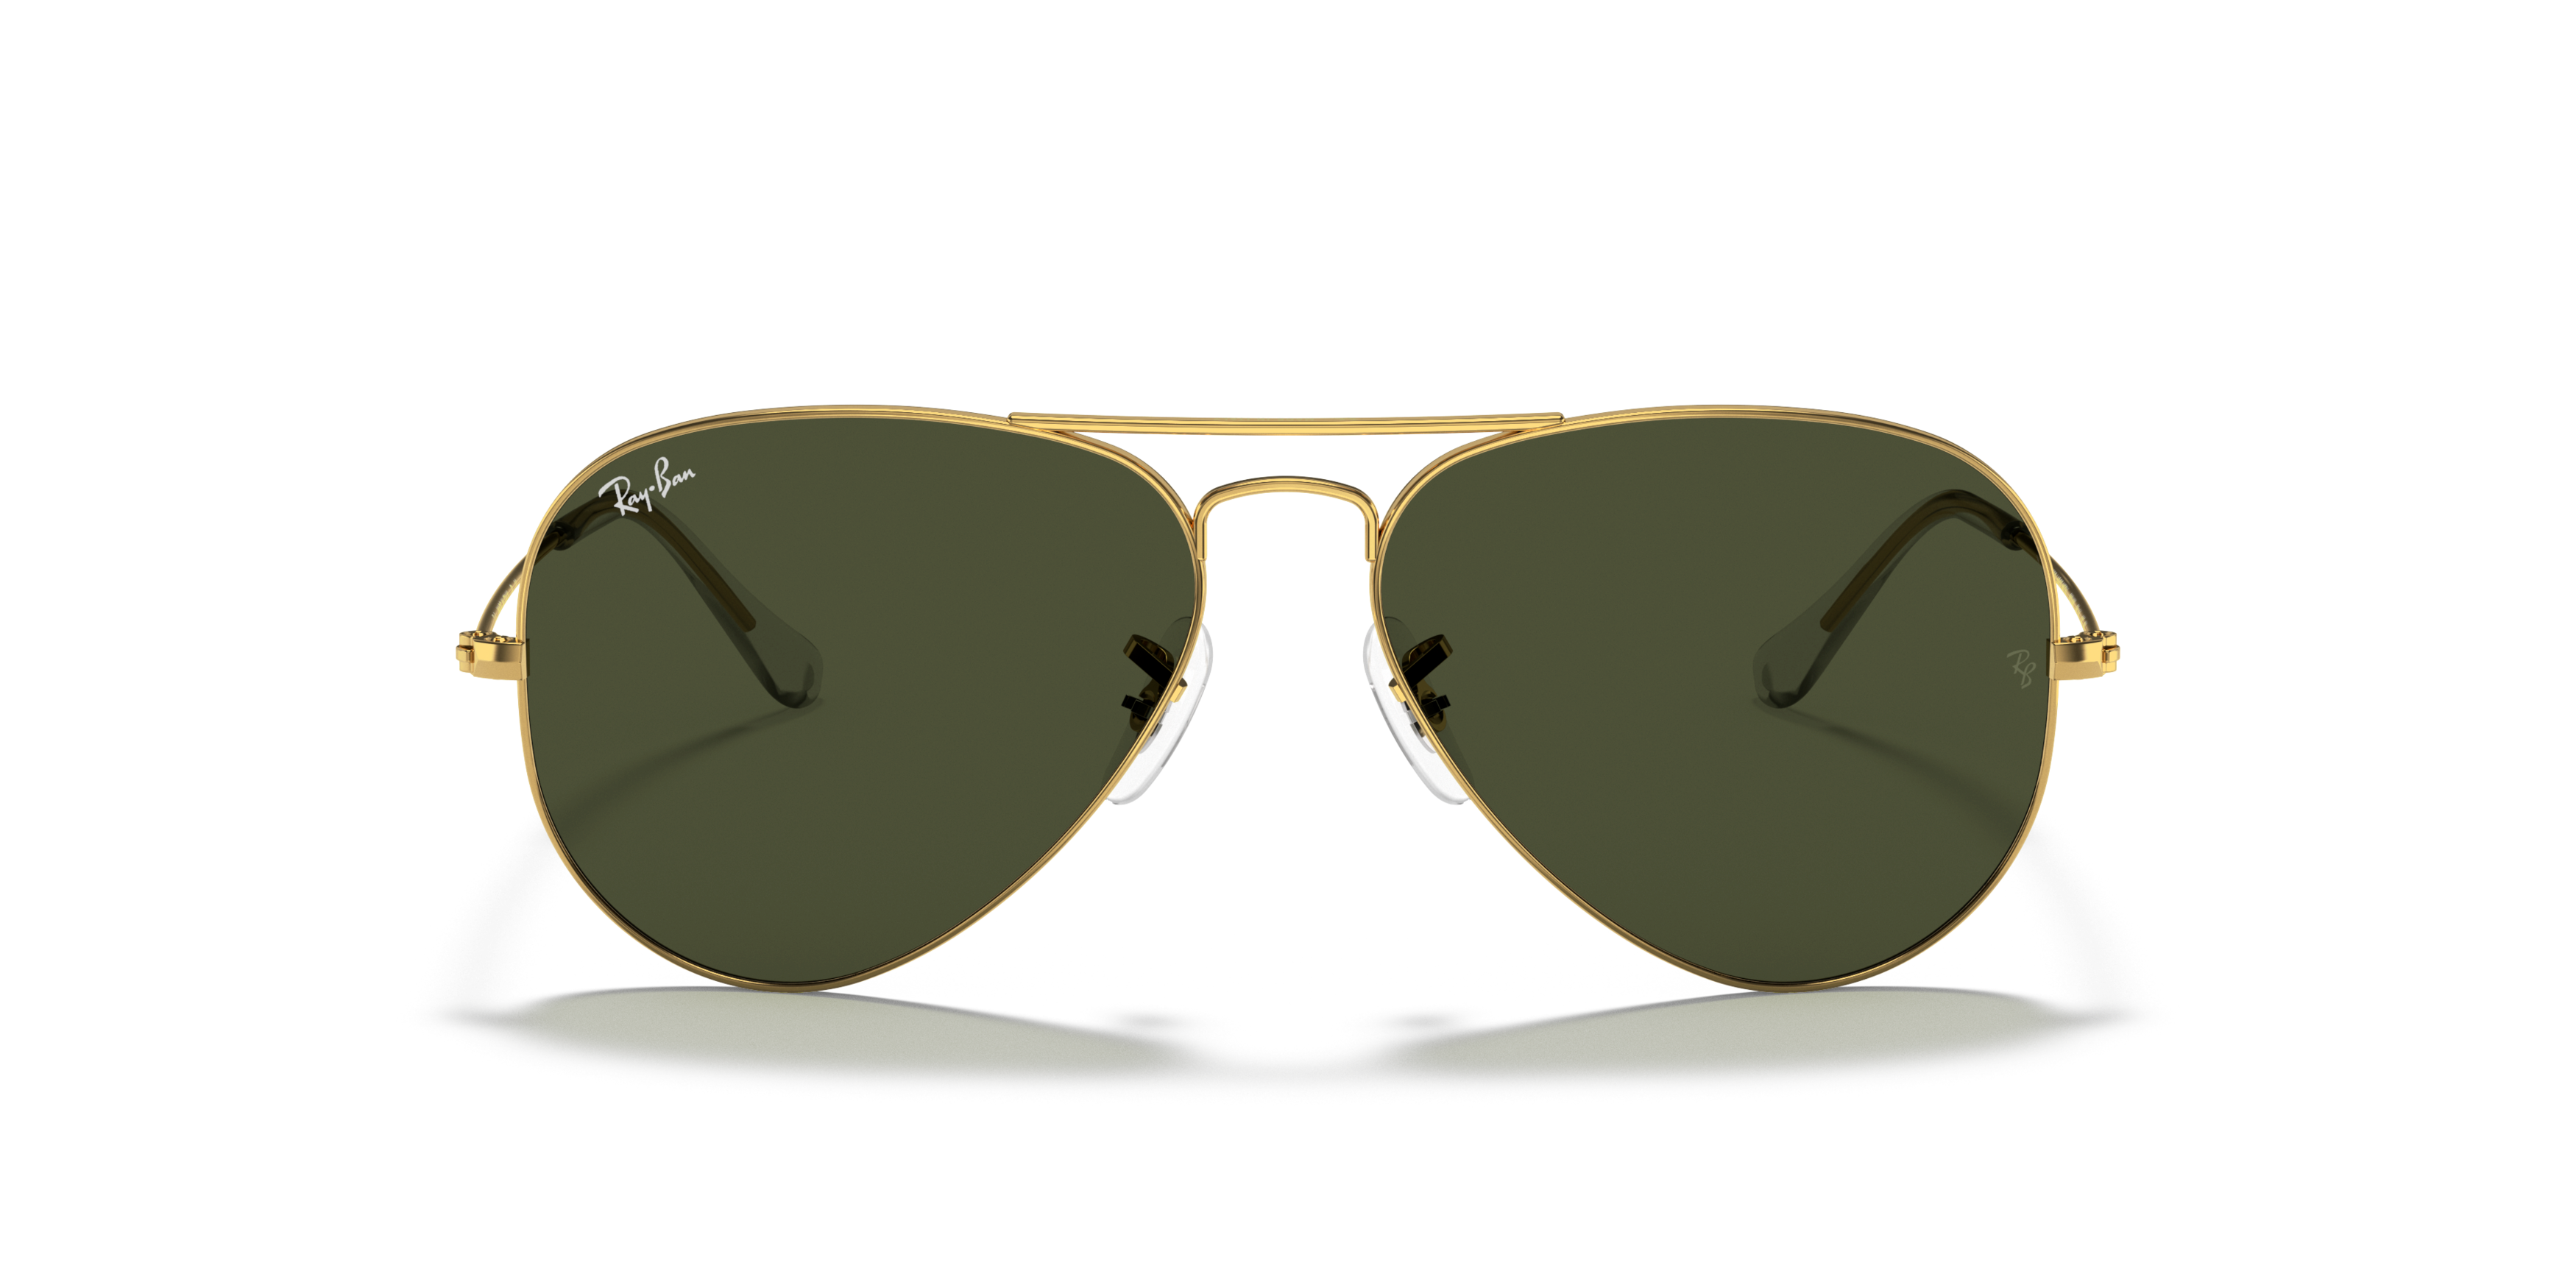 [products.image.front] RAY-BAN RB3025 L0205